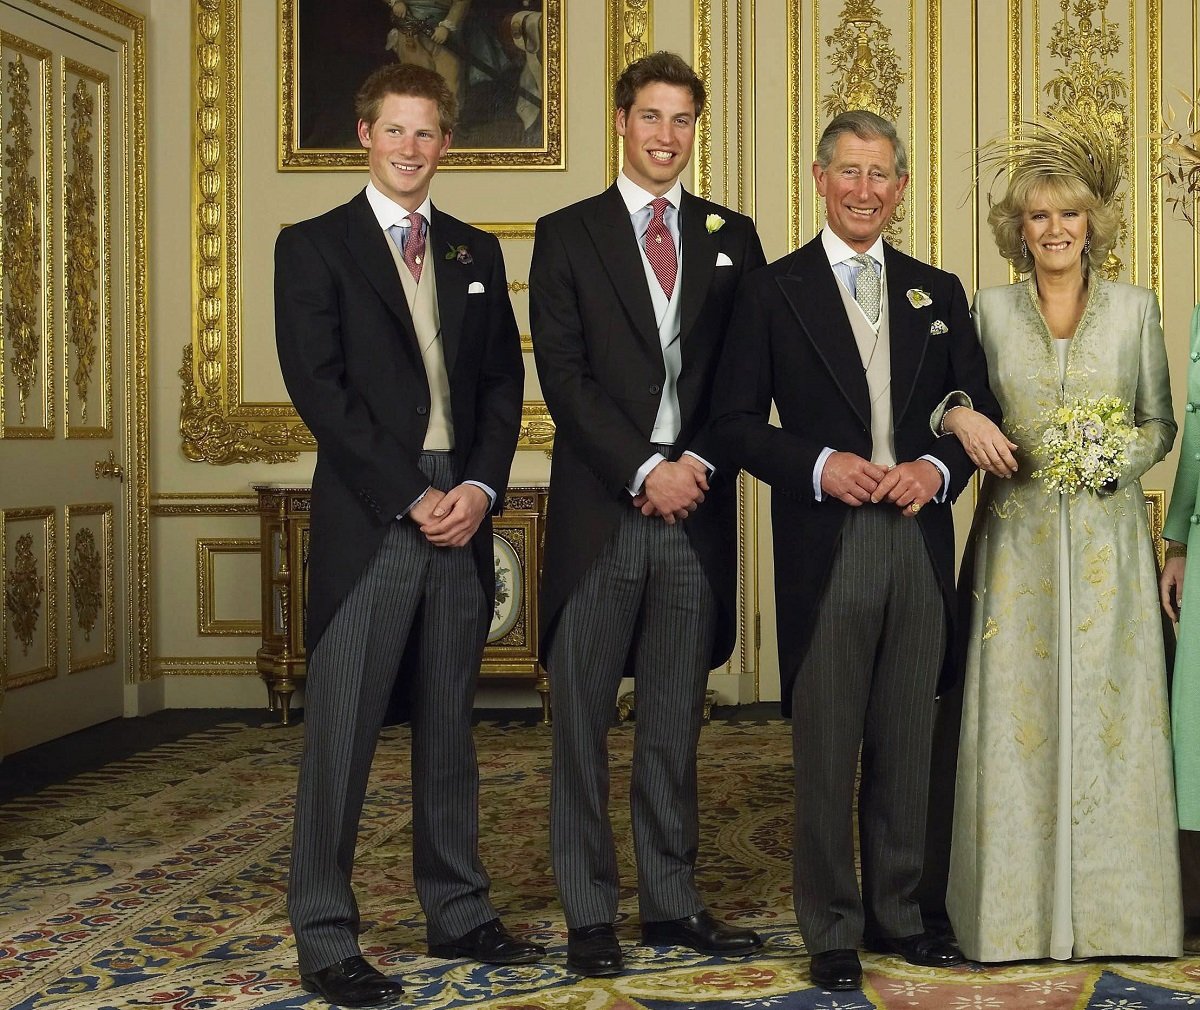 Clarence House official handout photo of the wedding of then-Prince Charles and Camilla Parker Bowles with Prince Harry, who a royal butler said was "excited" about the wedding, and Prince William